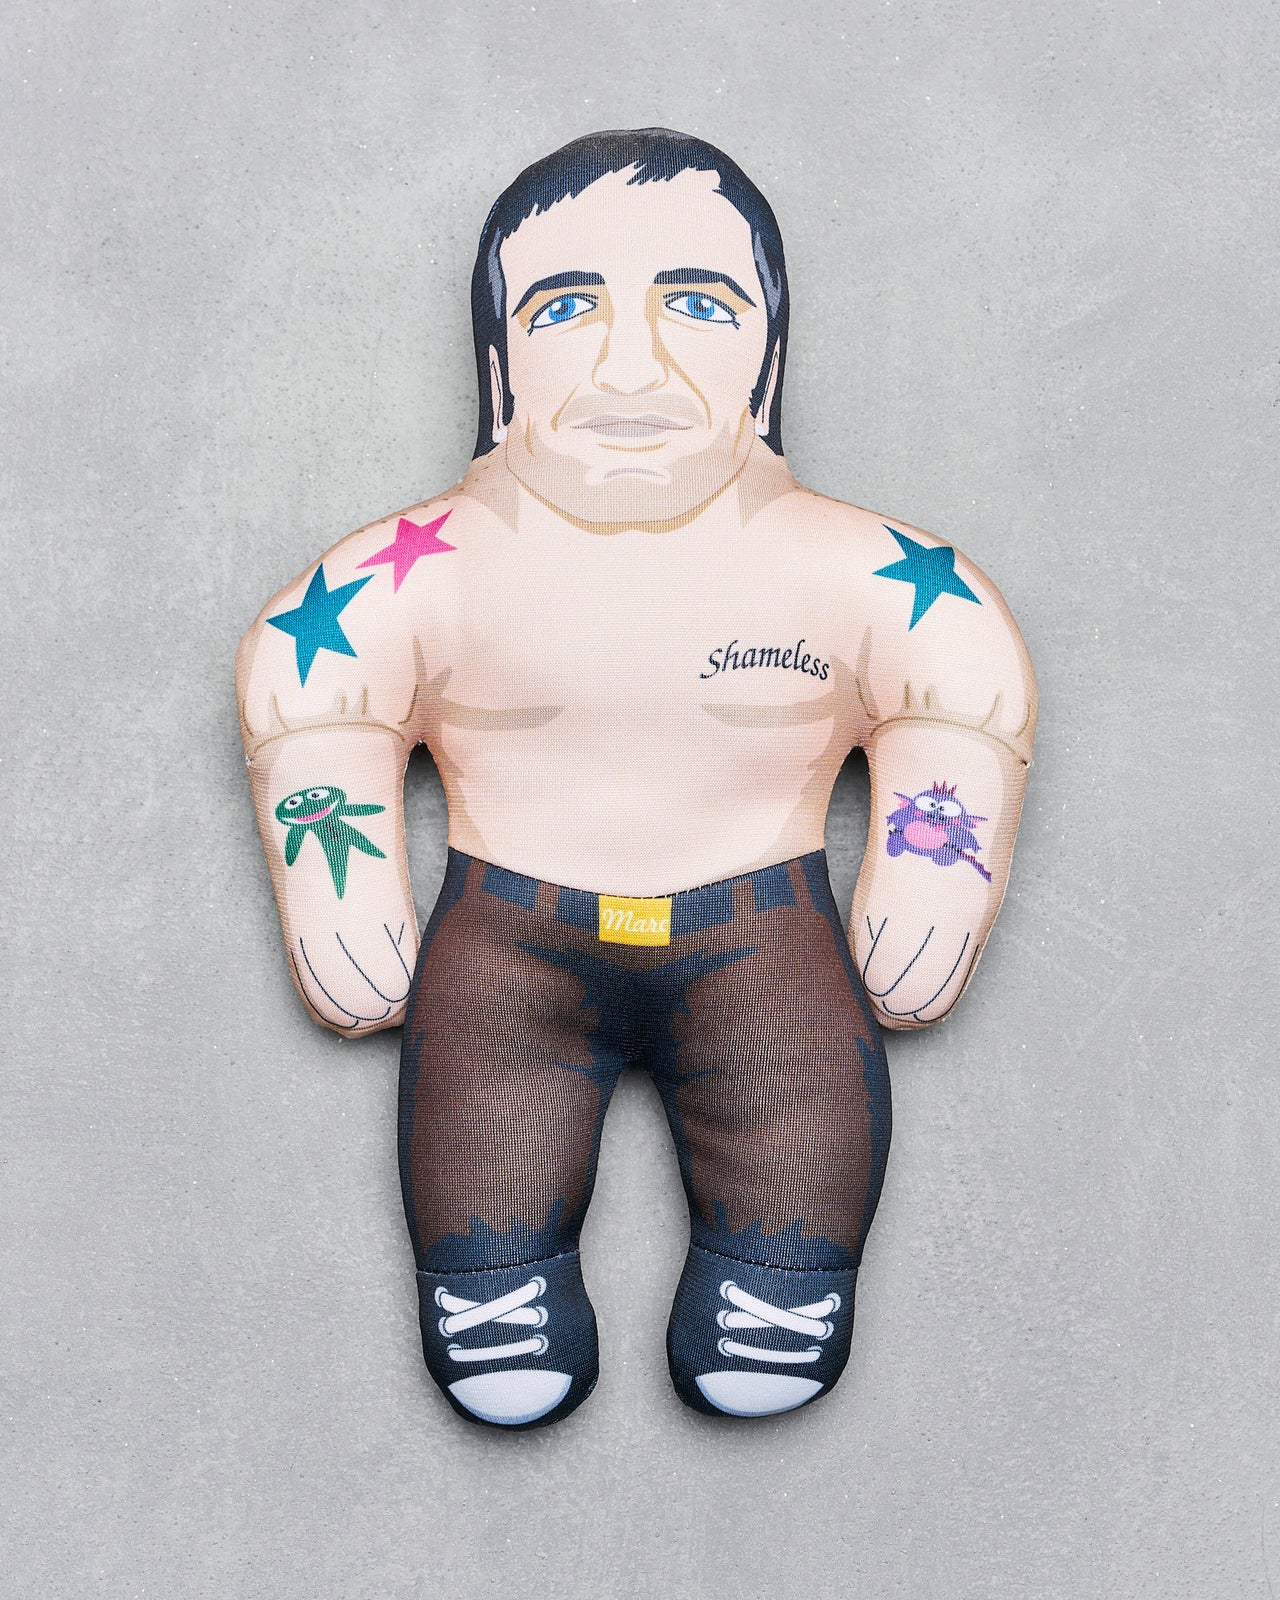 Marc Jacobs South Park 2012 "Muscle Man Marc" 12 inch soft doll